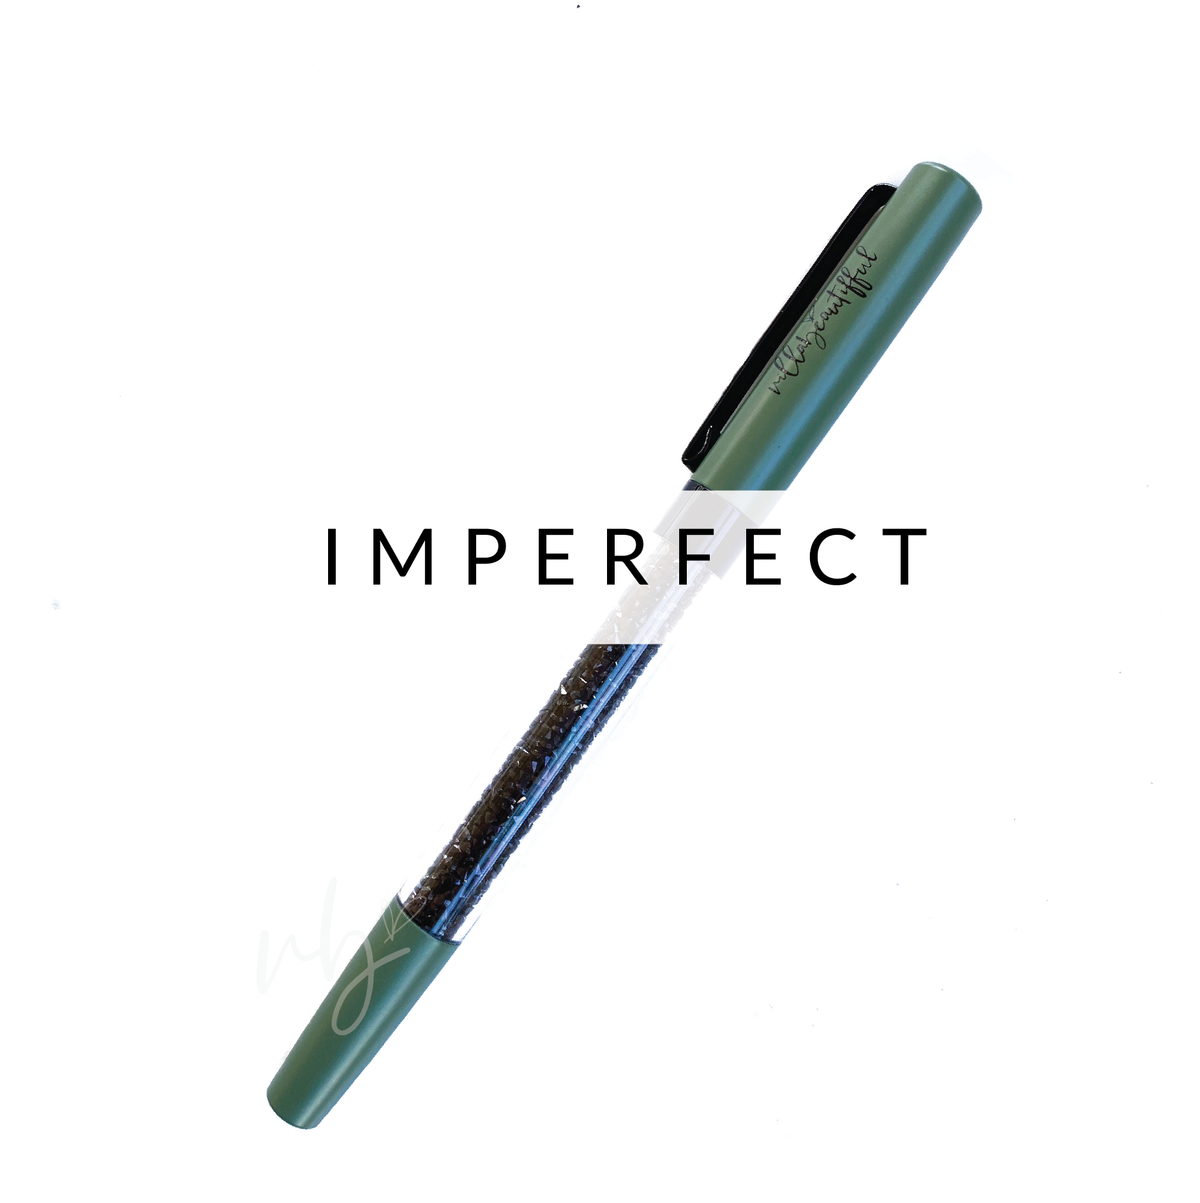 Monstera Imperfect Crystal VBPen | limited pen